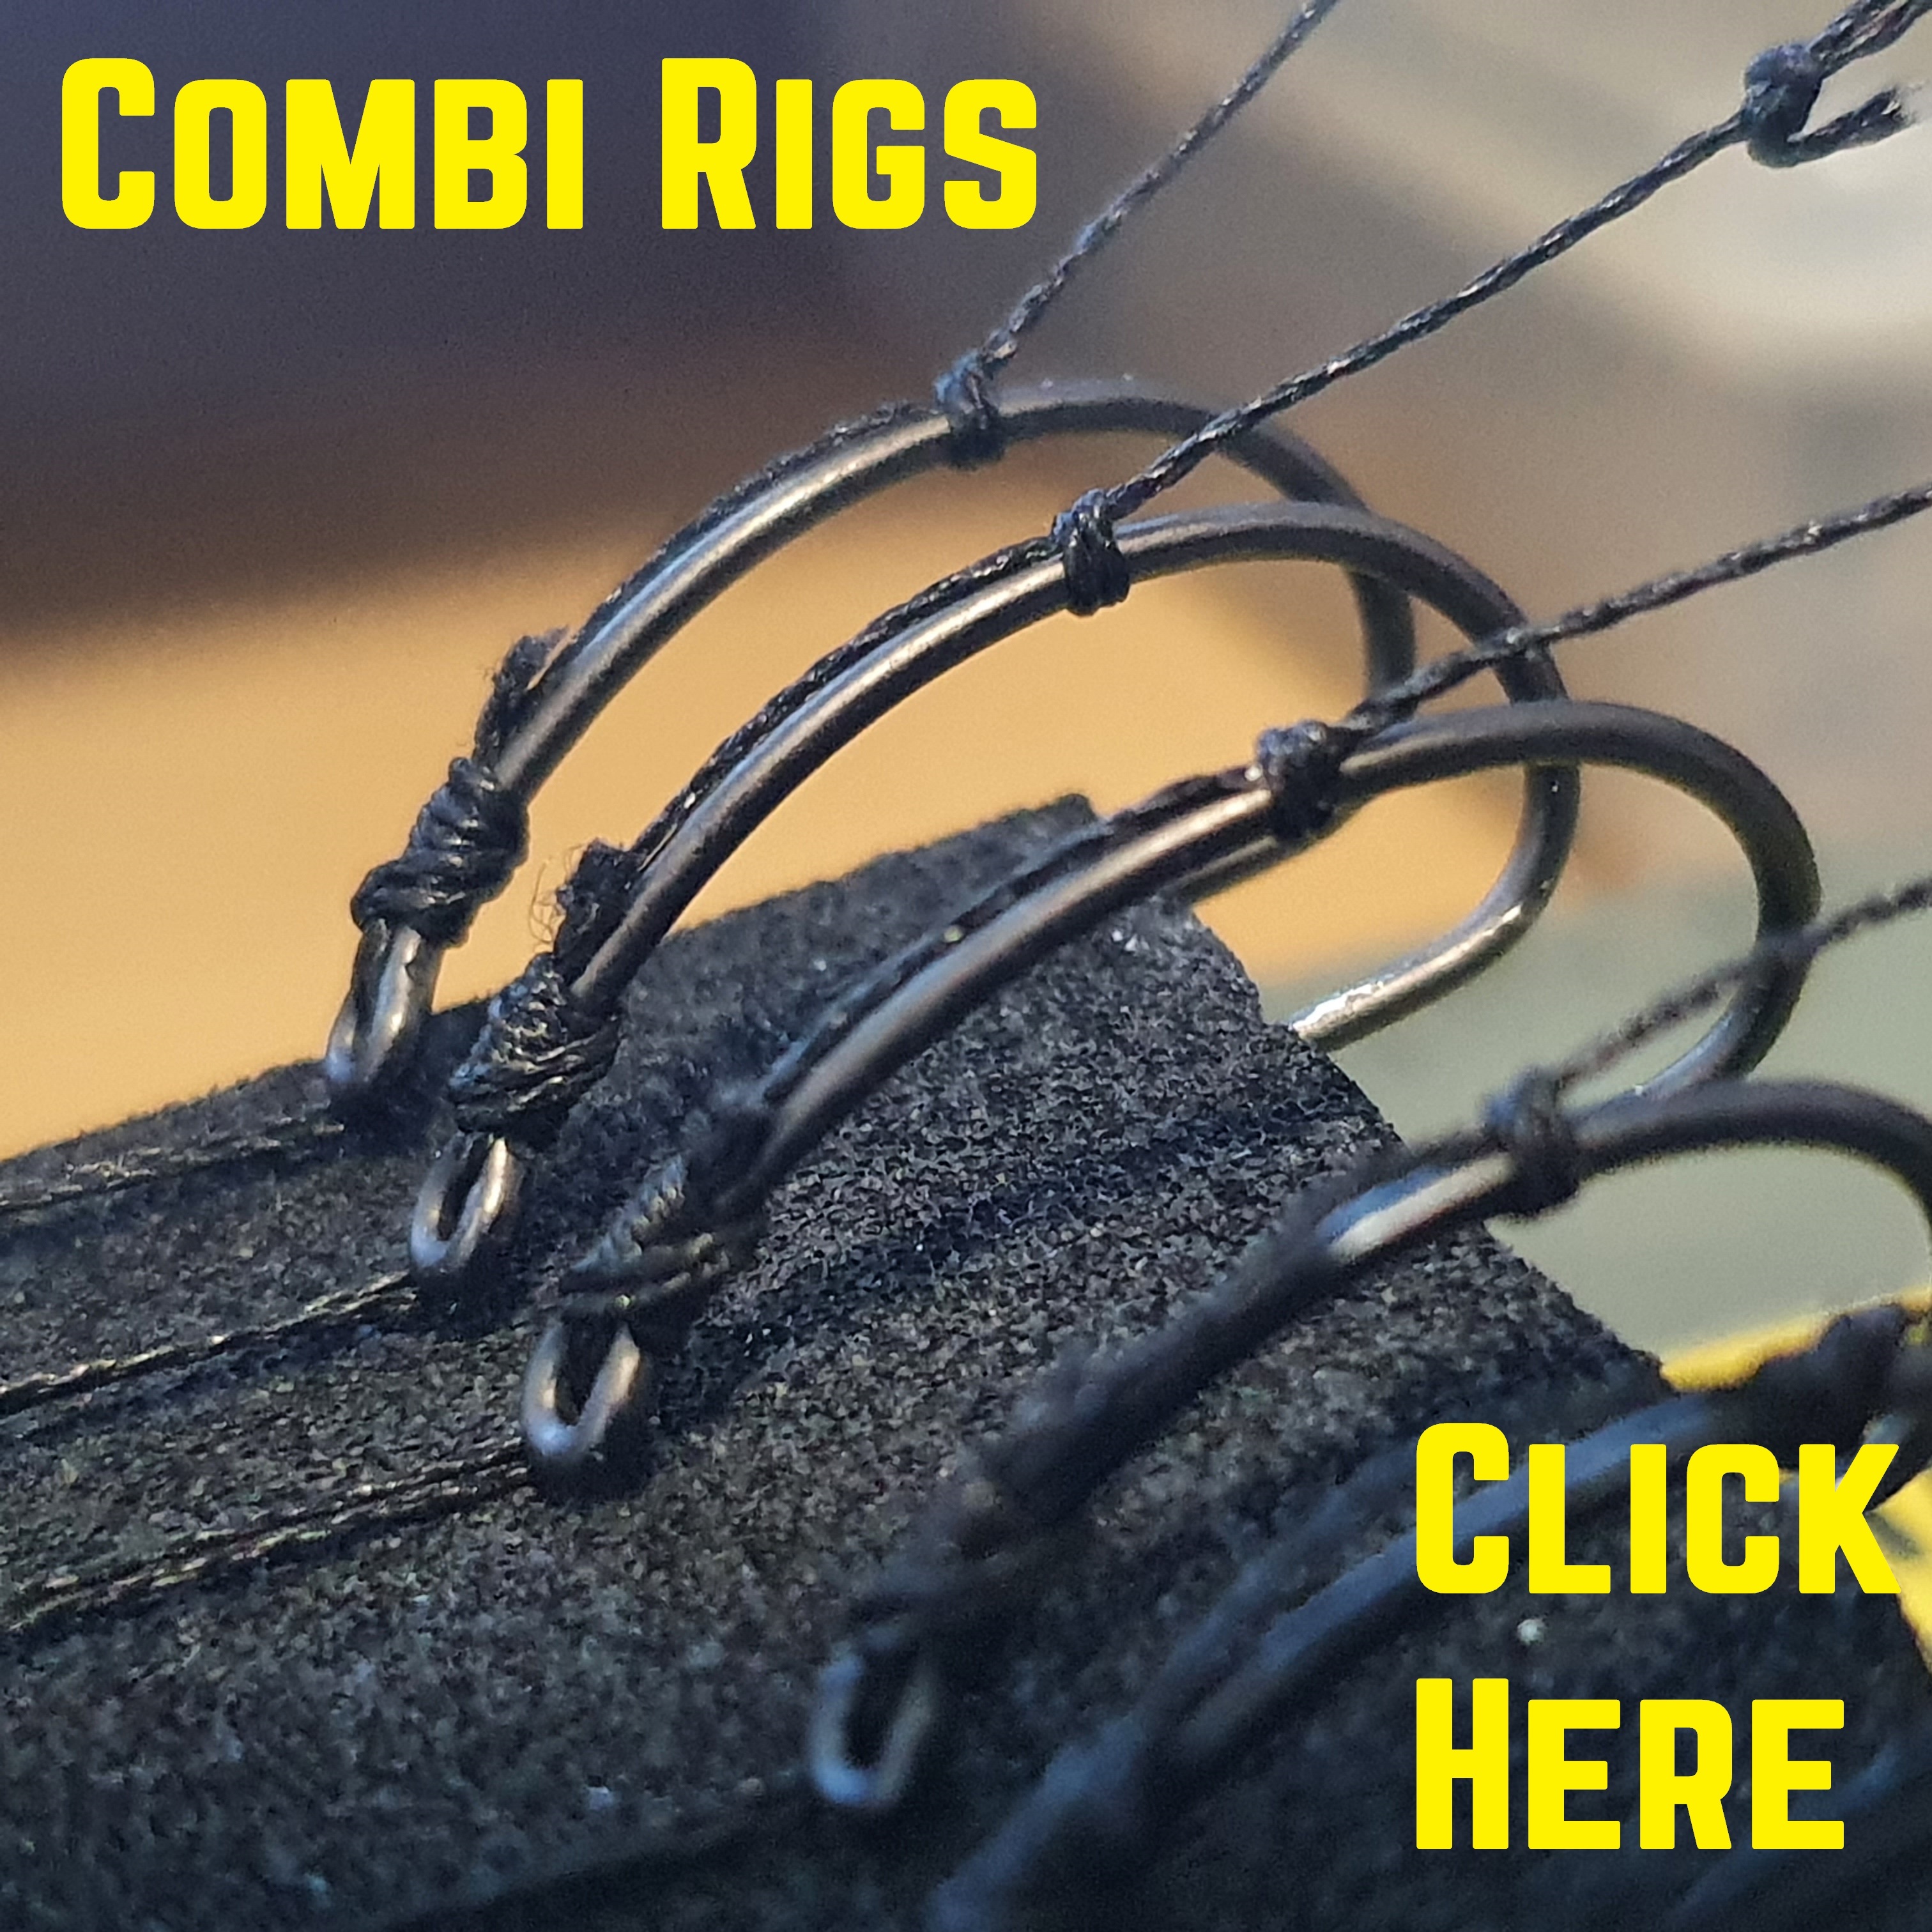 Please take a look at our other Combi Rig listings